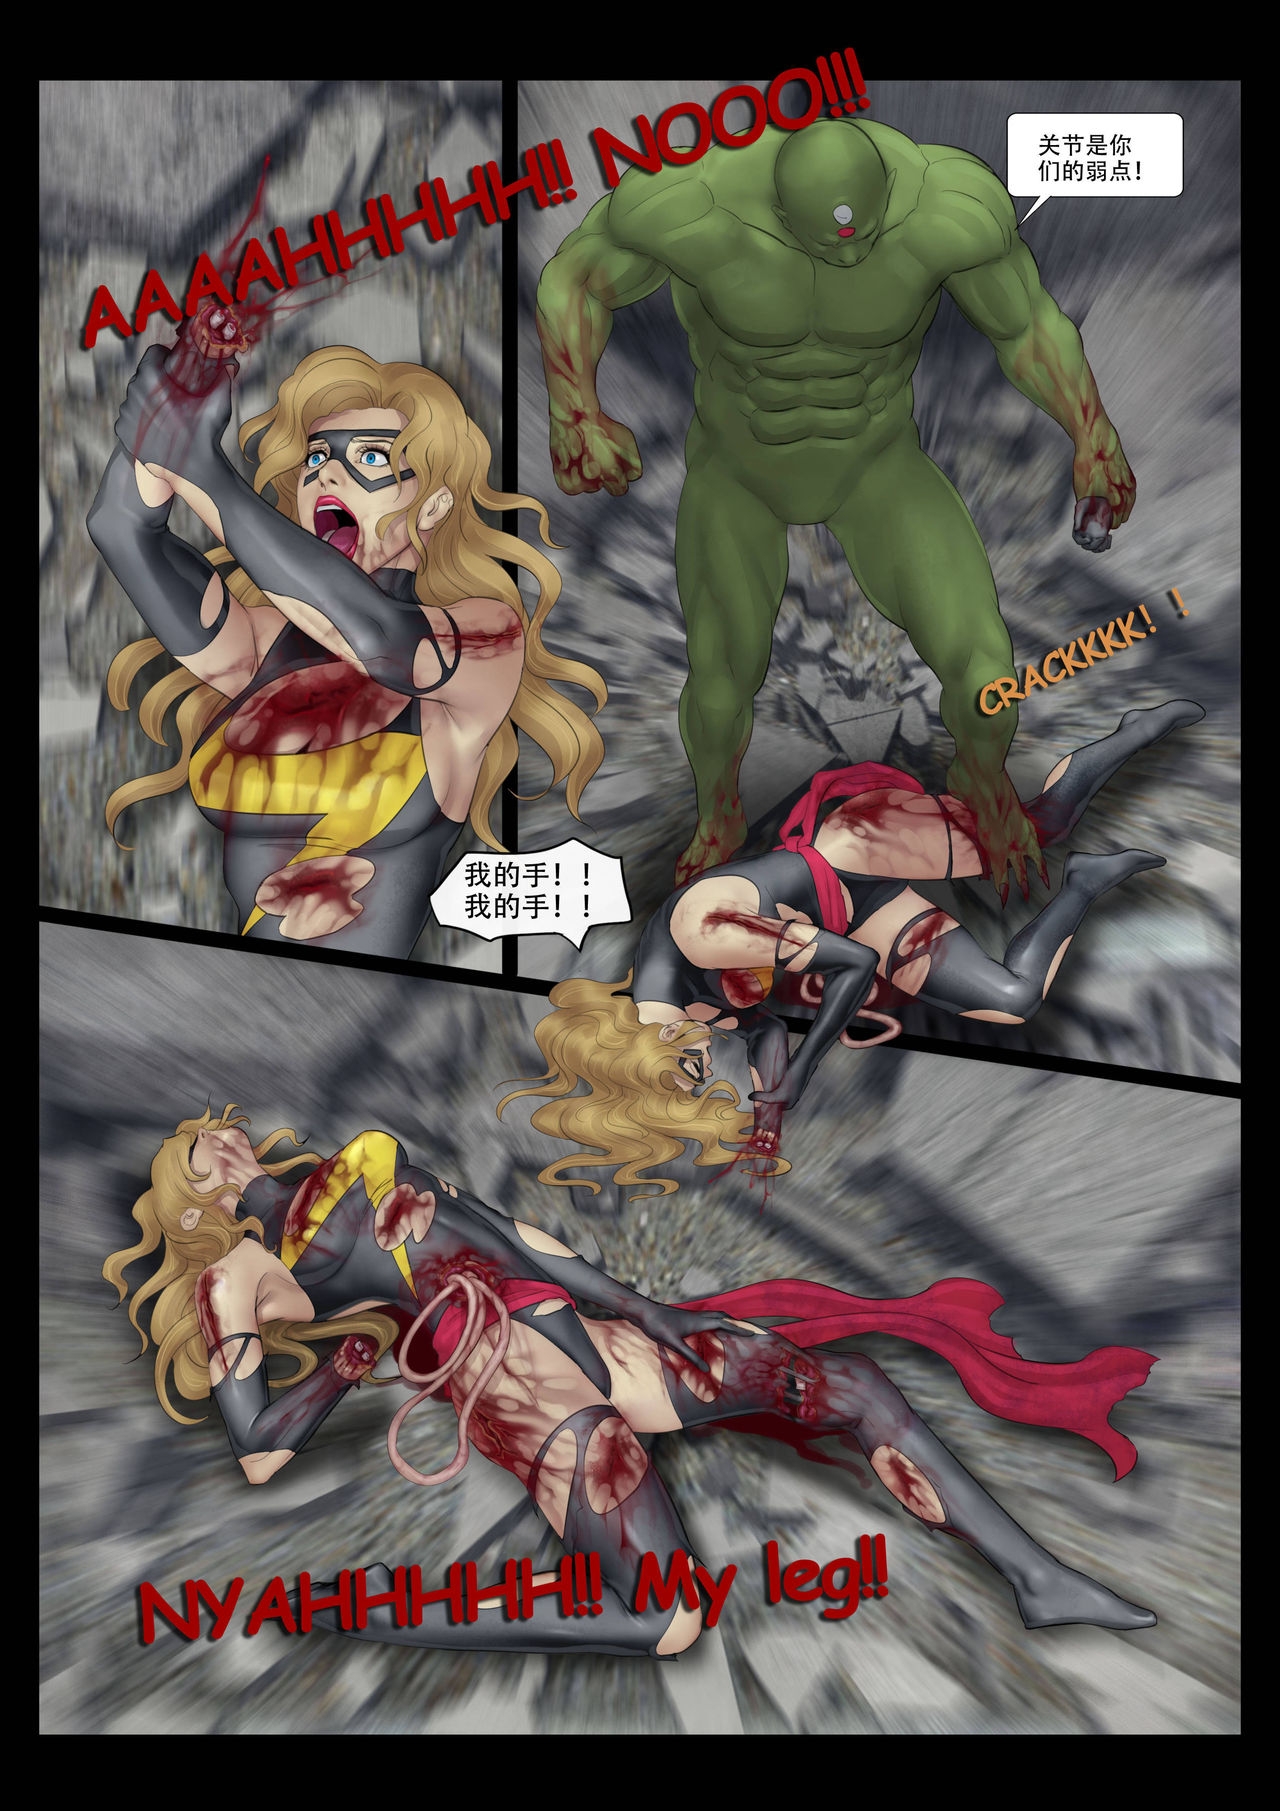 The Nightmare of Avengers Chapter 0 30